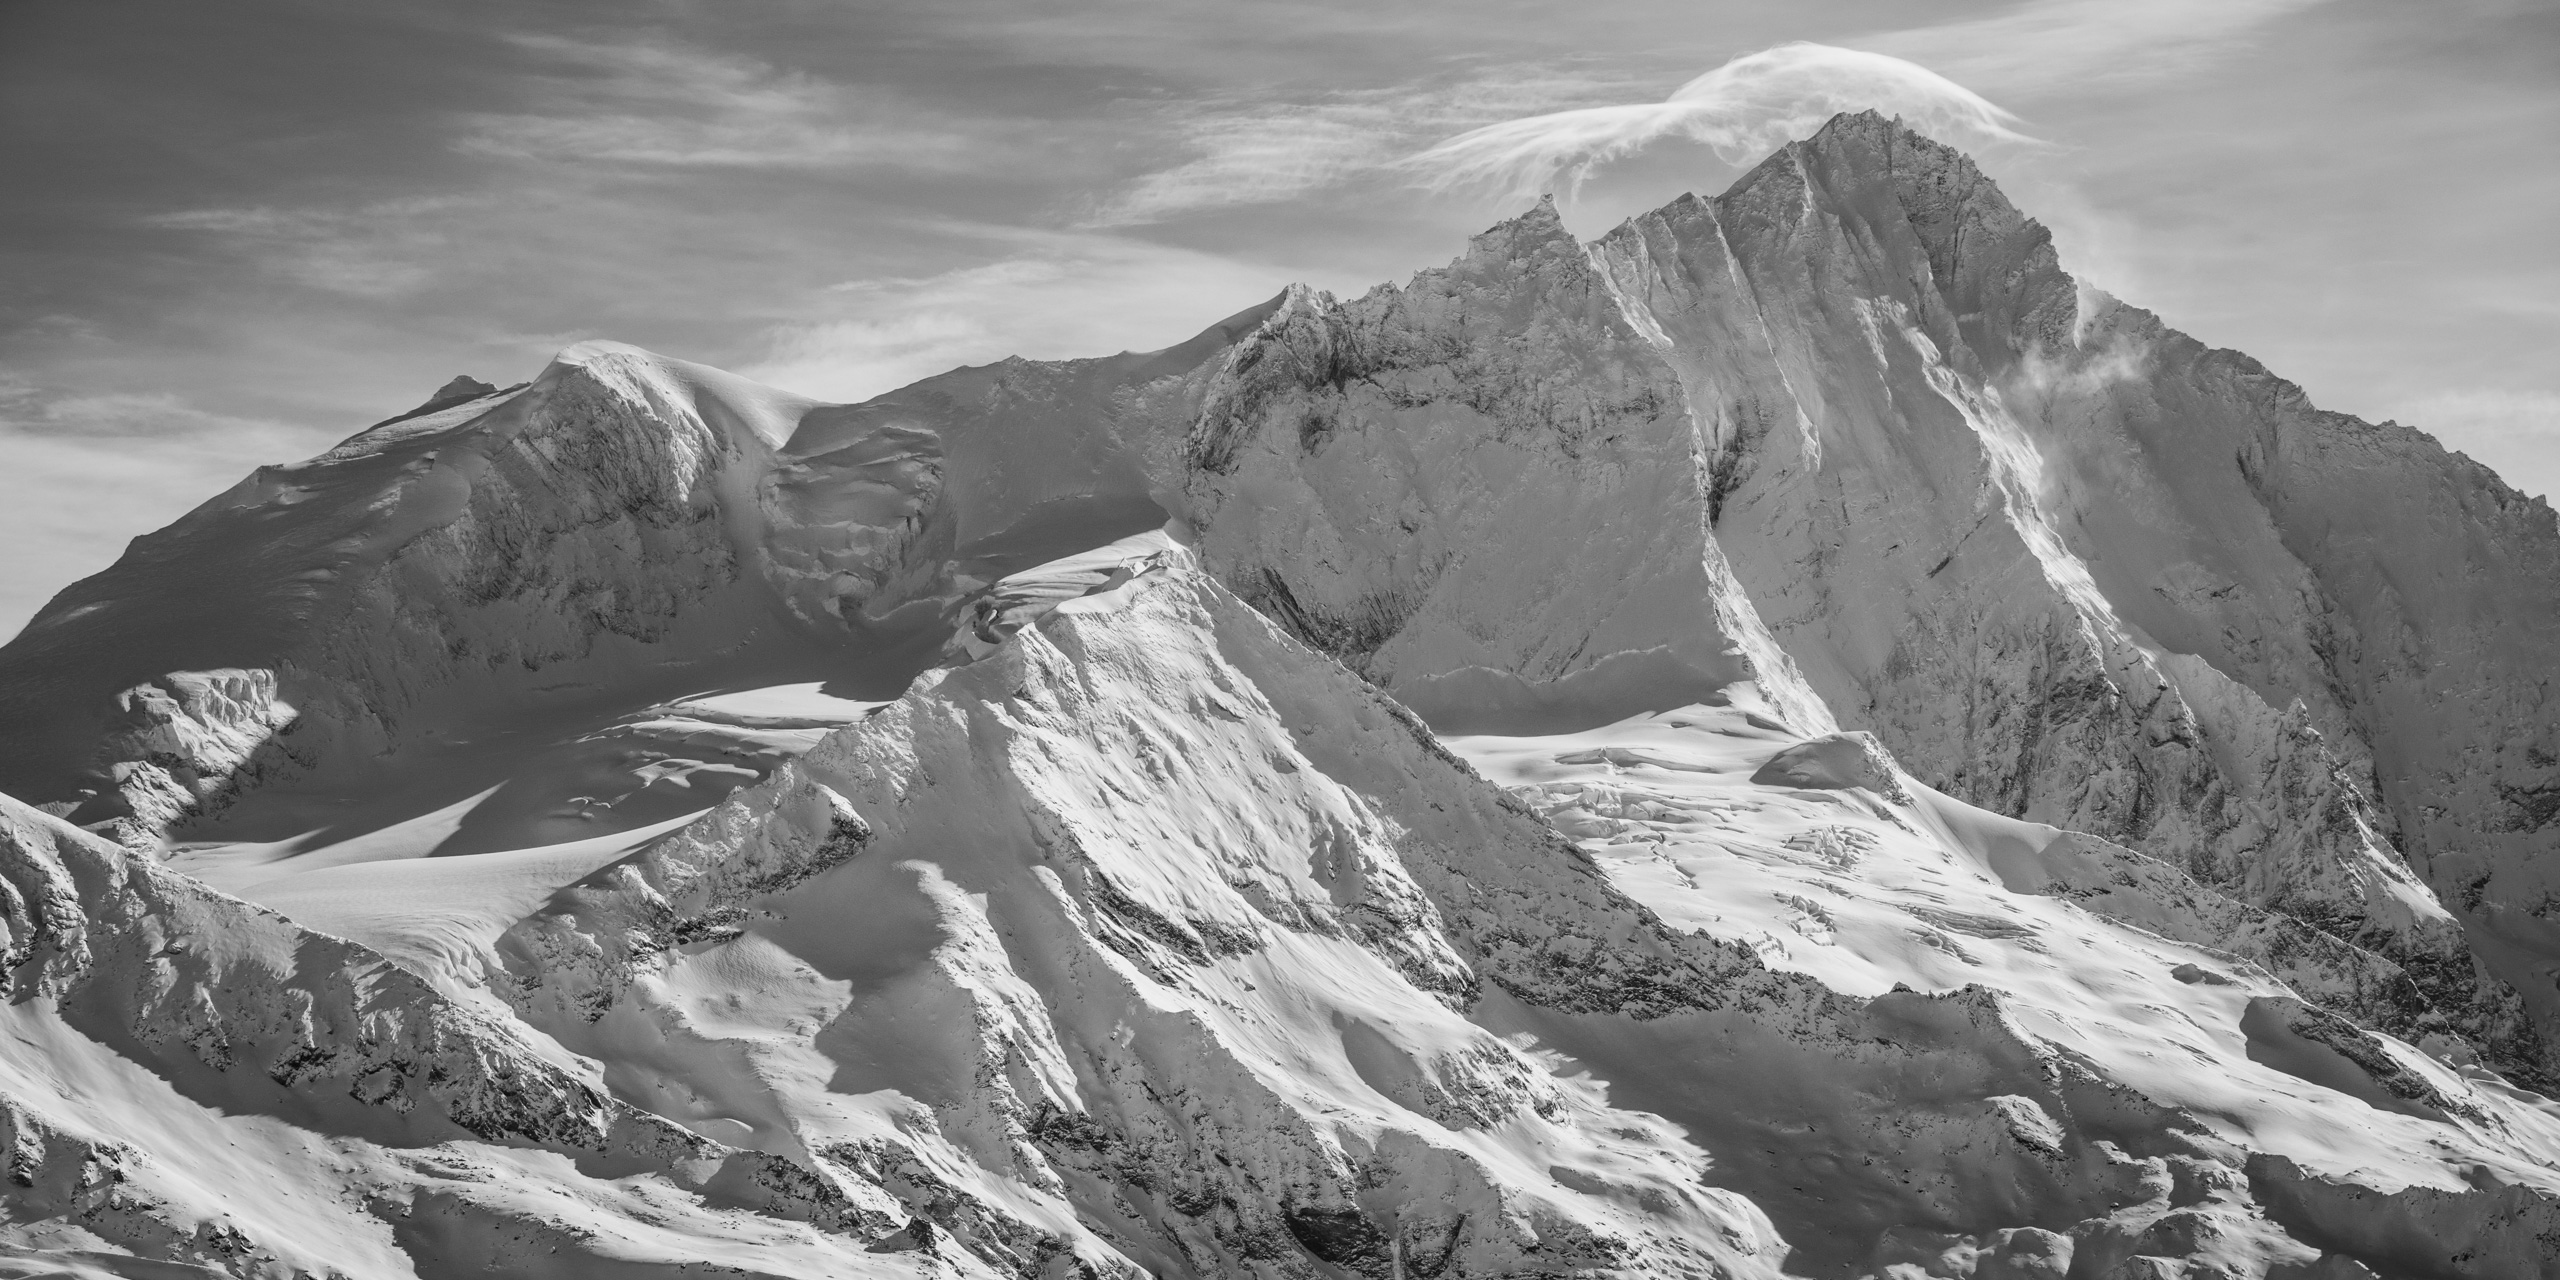 Black and white panorama of the rocky mountain peaks of Weisshorn from Grimentz in the Valais Alps from Crans Montana